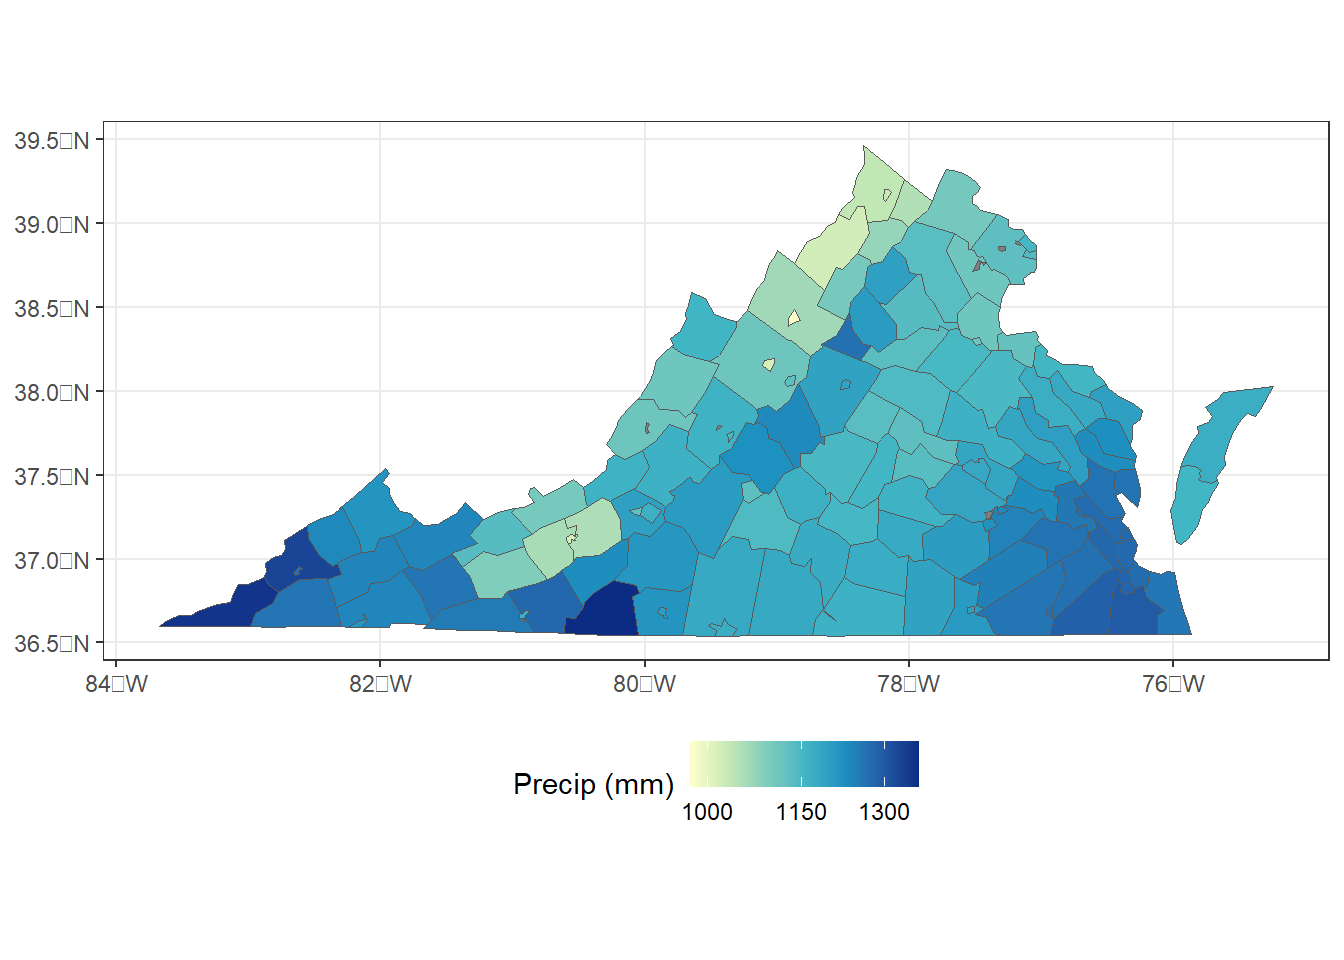 County-level zonal summaries of precipitation data from the PRISM dataset for Virginia.